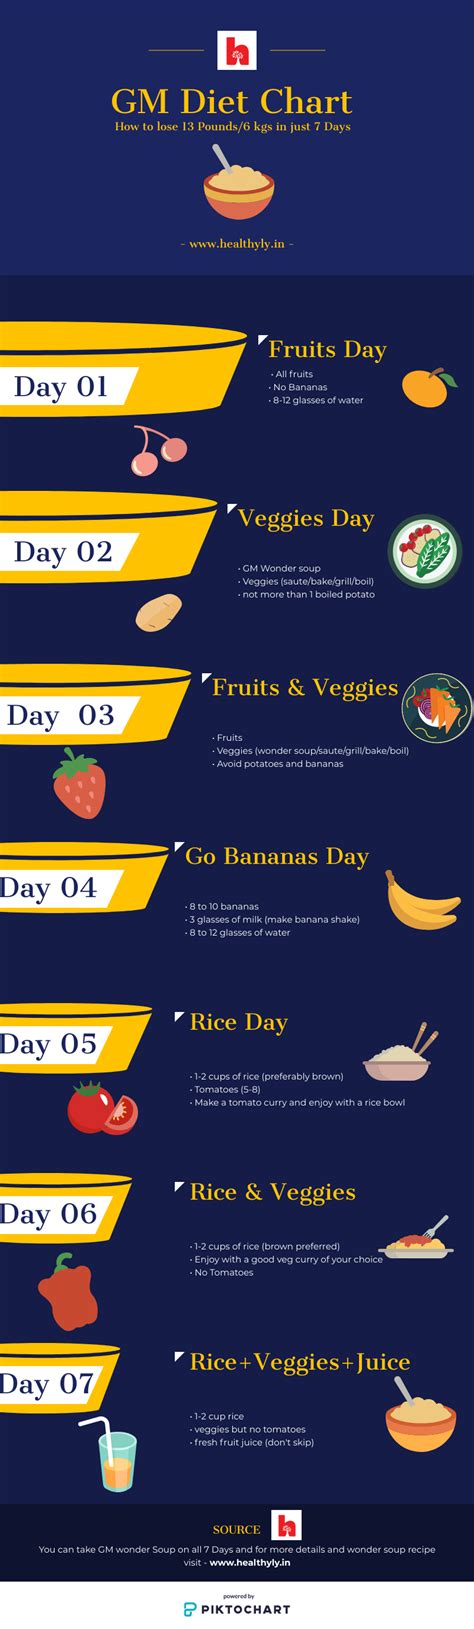 All the food restrictions are beginning to fade, and by now your feast recipes are getting more and more elaborate. GM Diet Chart: How to loose 4 Kgs in just 7 days! - GM ...